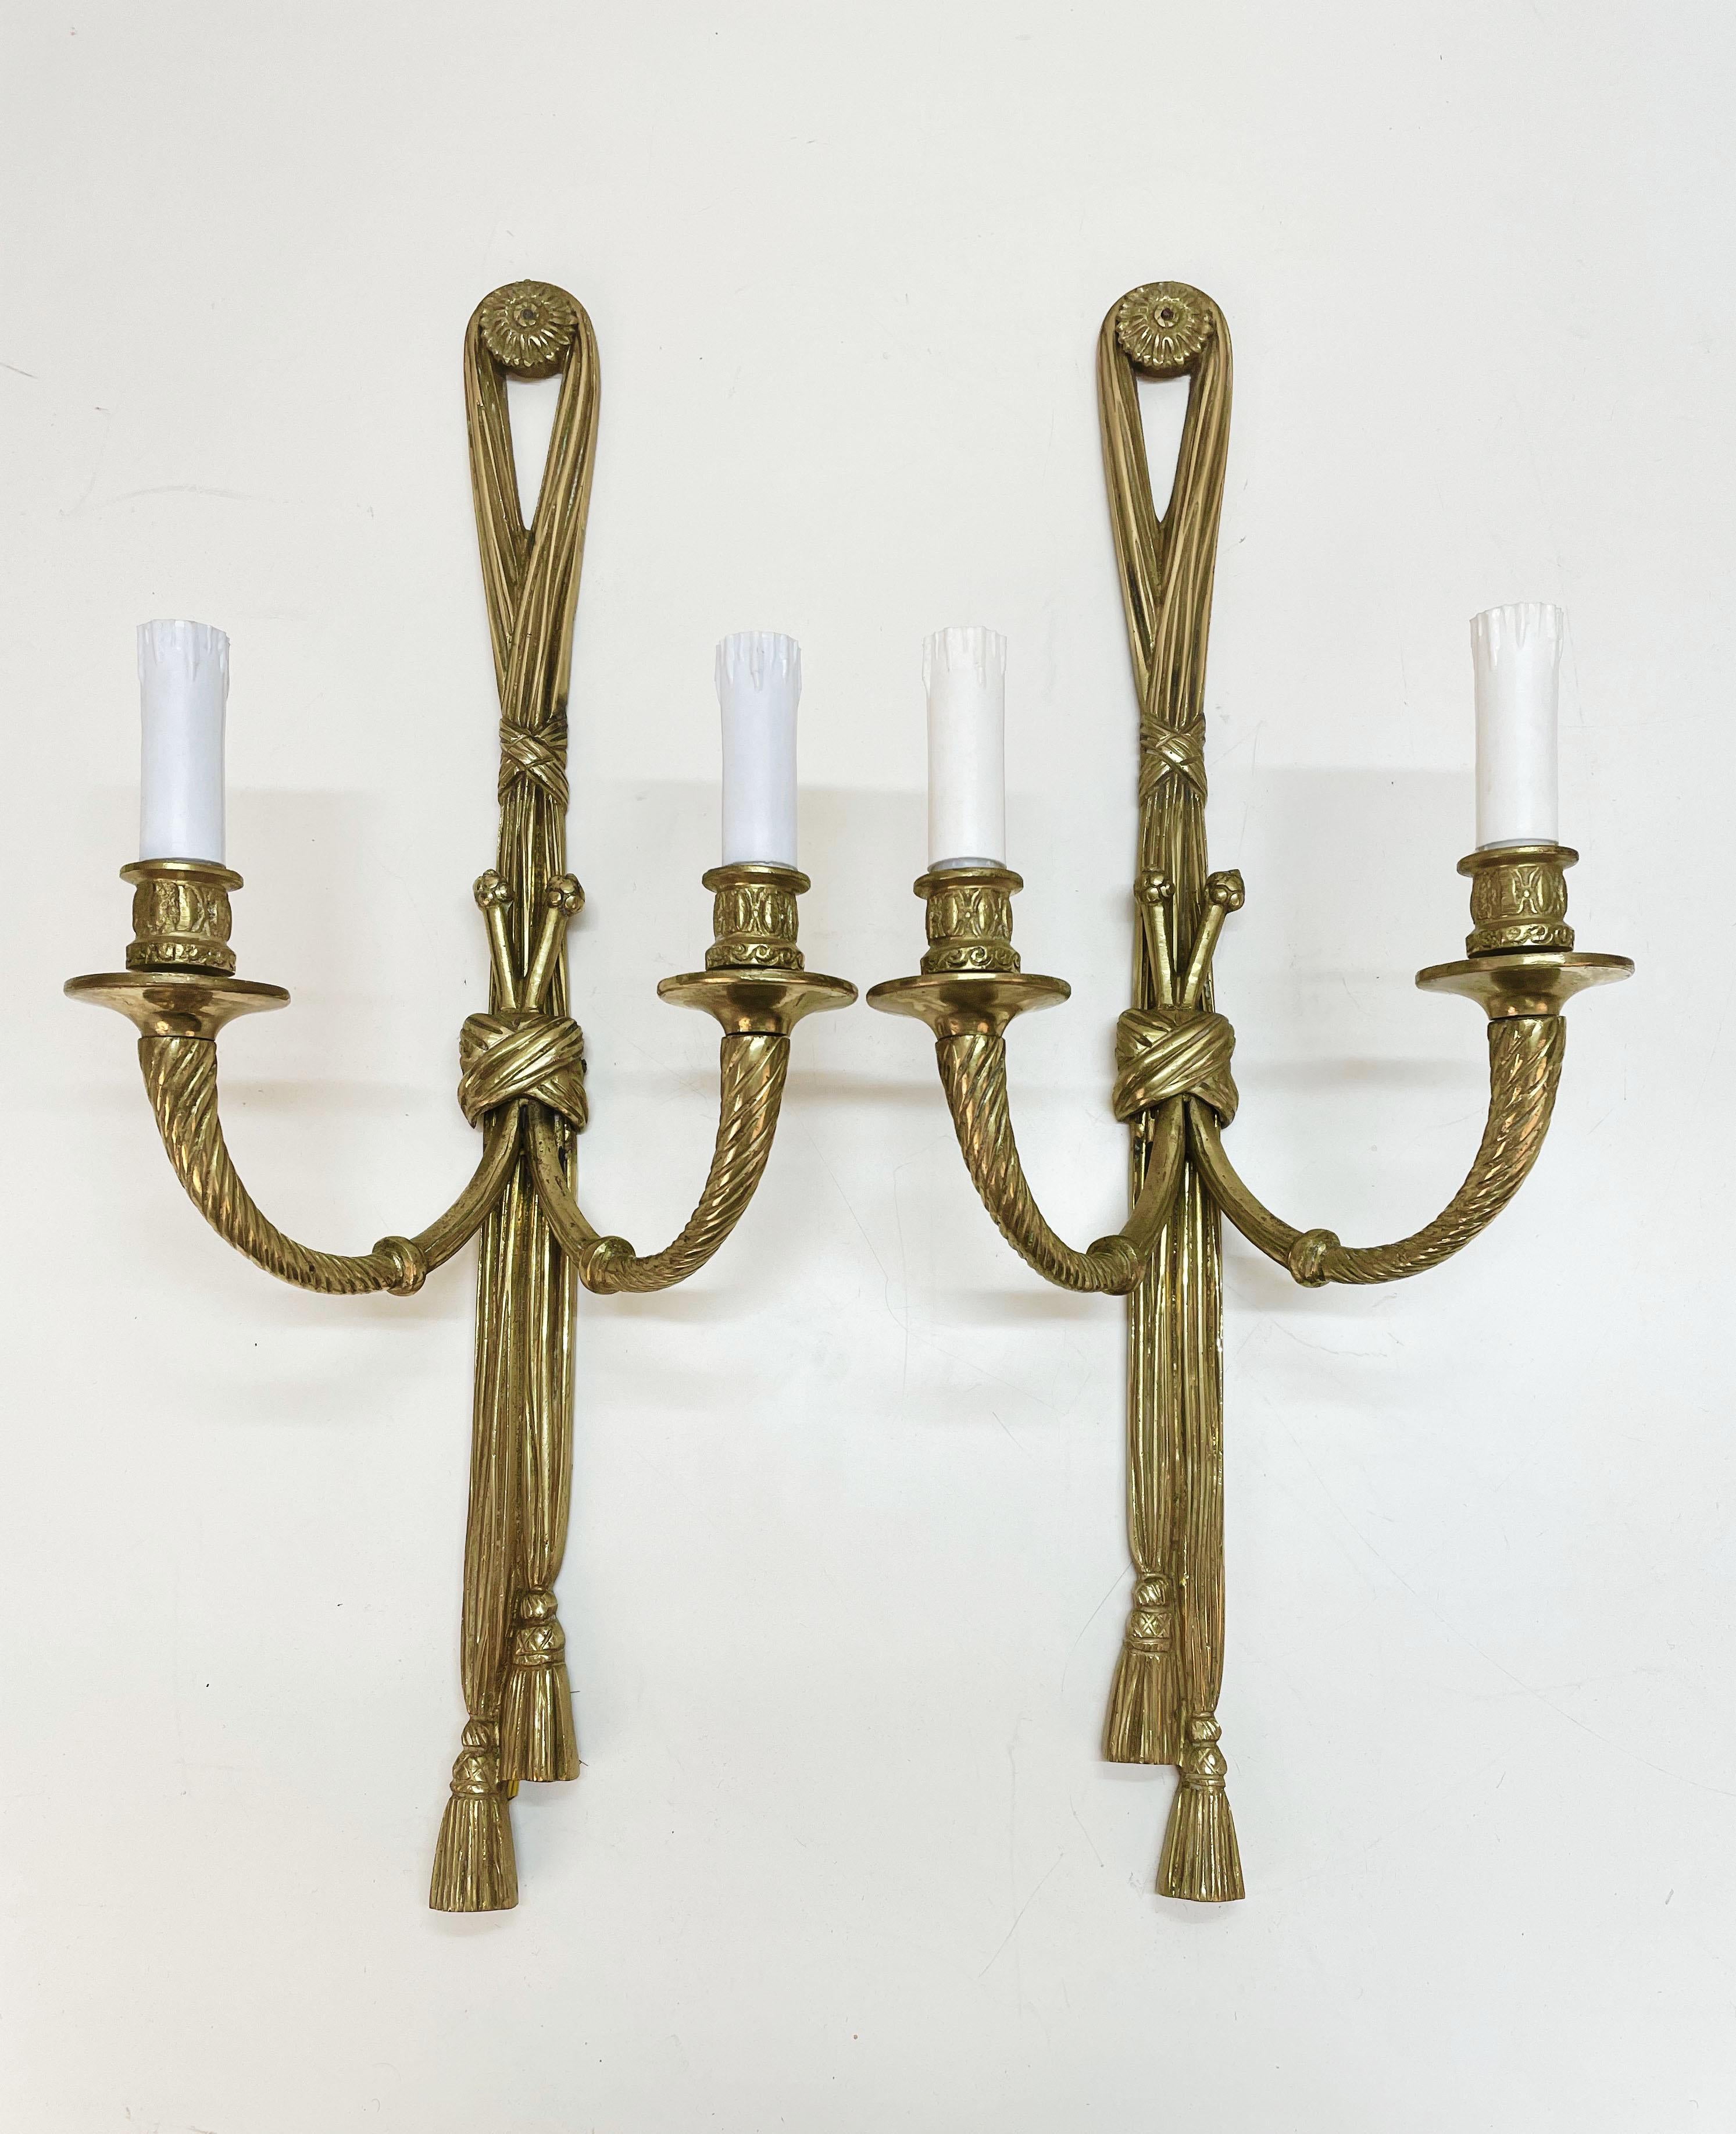 Pair of 19th Century Louis XVI Style Knot & Tassel Appliqué Wall Candle Sconces For Sale 4